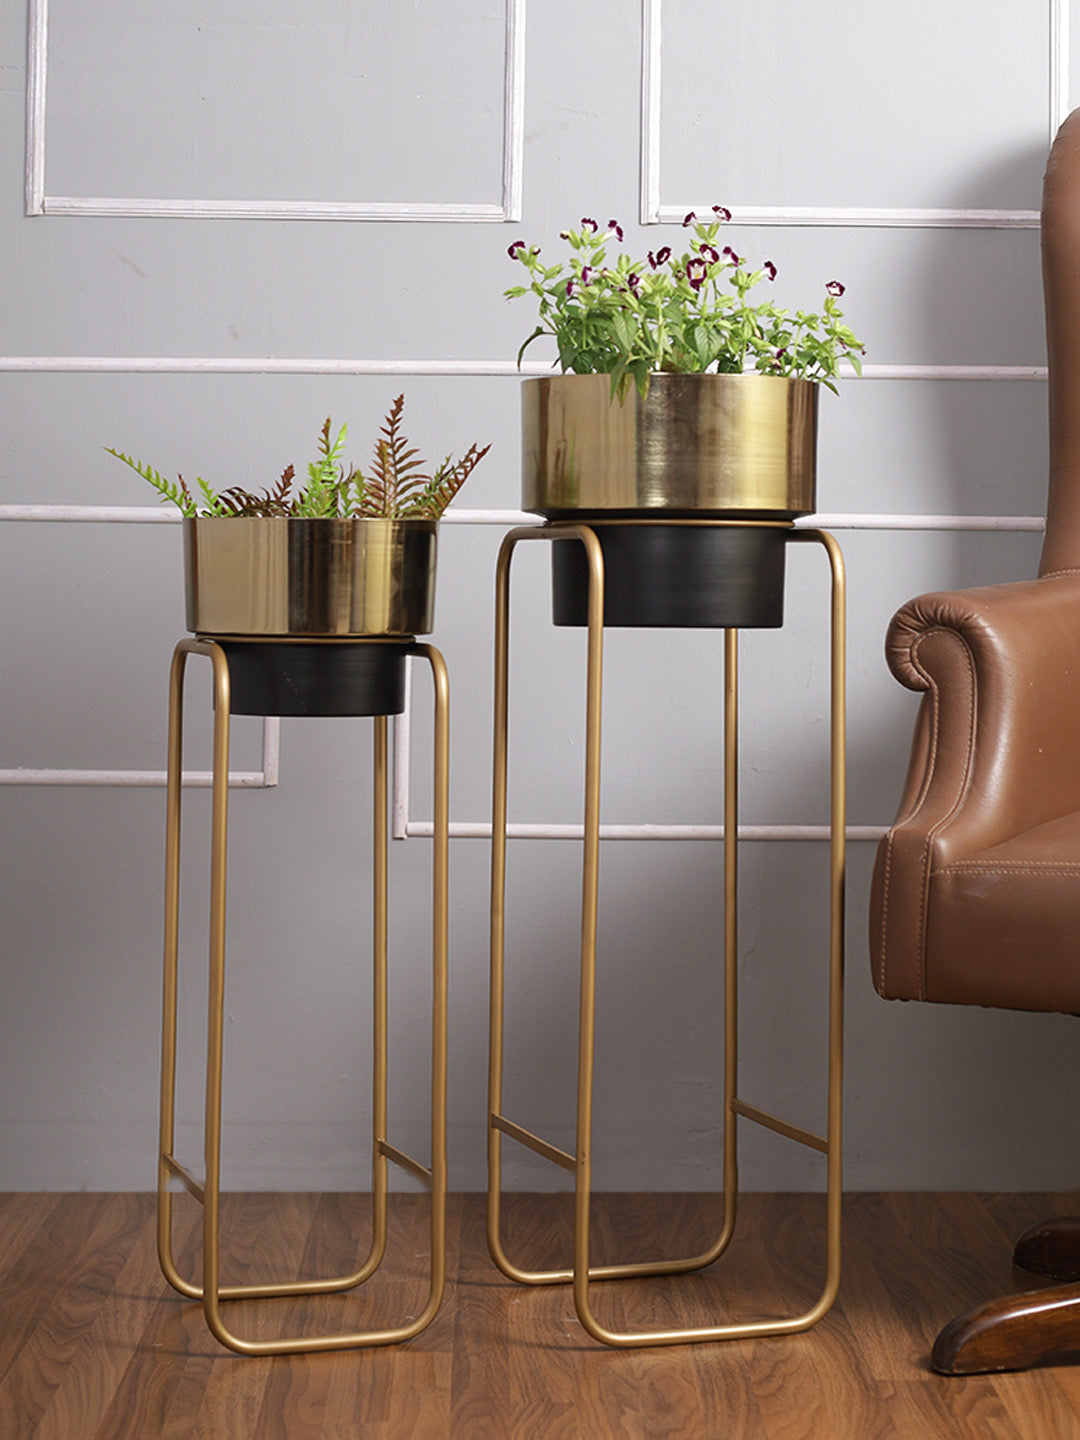 Set of 2 Golden & Black Planters with Stand - Default Title (CHM2205_2)